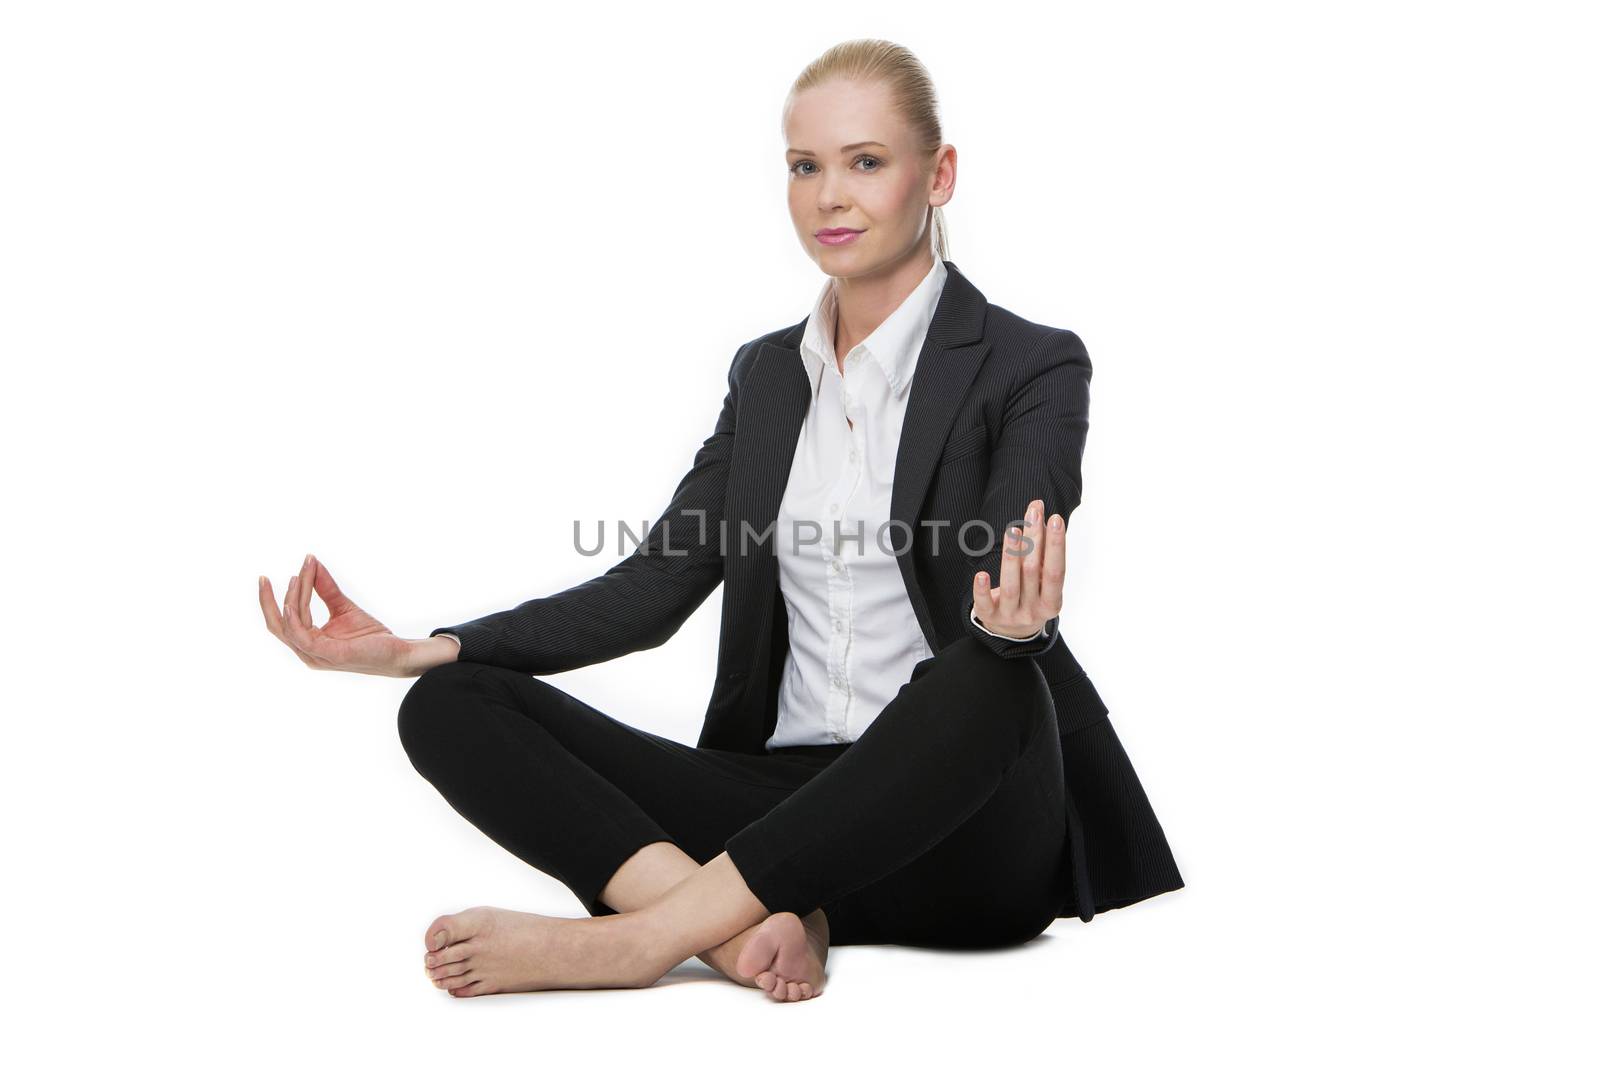 blonde businesswoman seated on the floor doing a yoga position